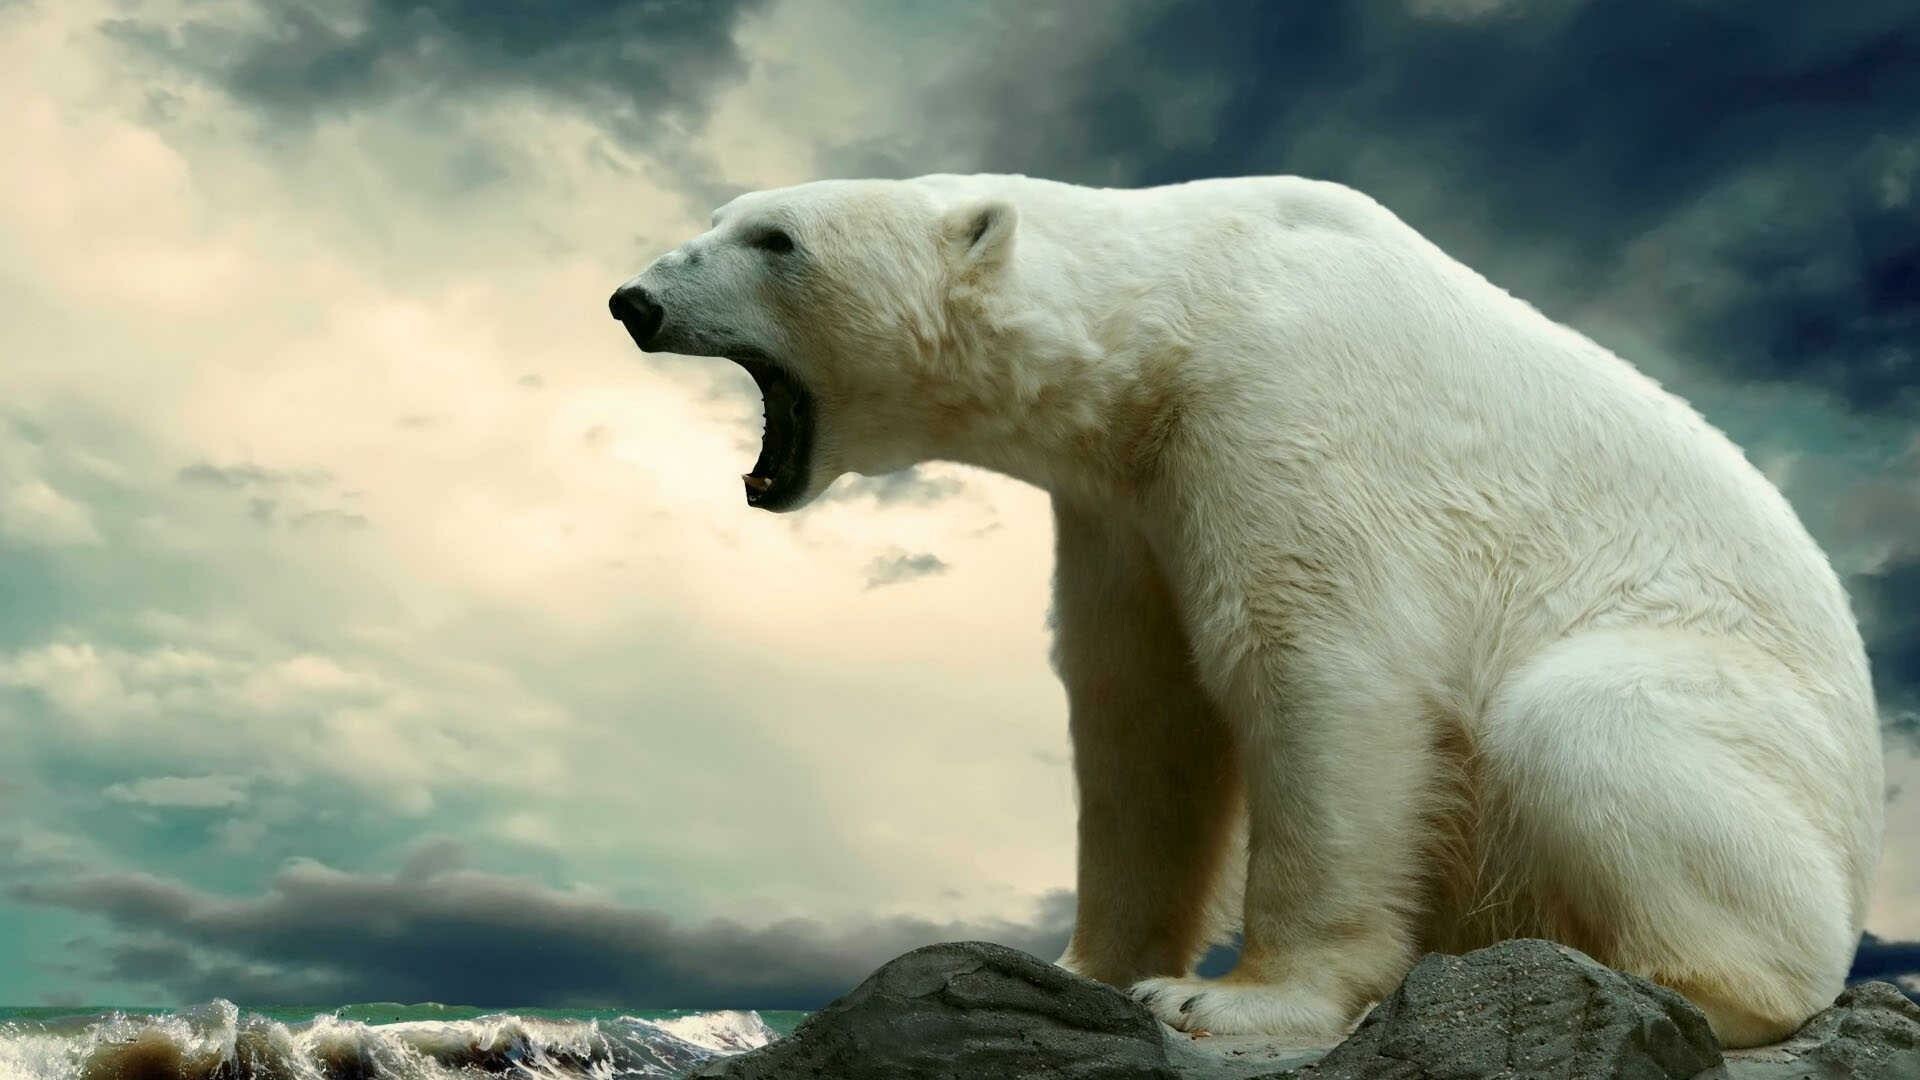 Bear: Ursus maritimus, Live in one of the planet's coldest environments. 1920x1080 Full HD Background.